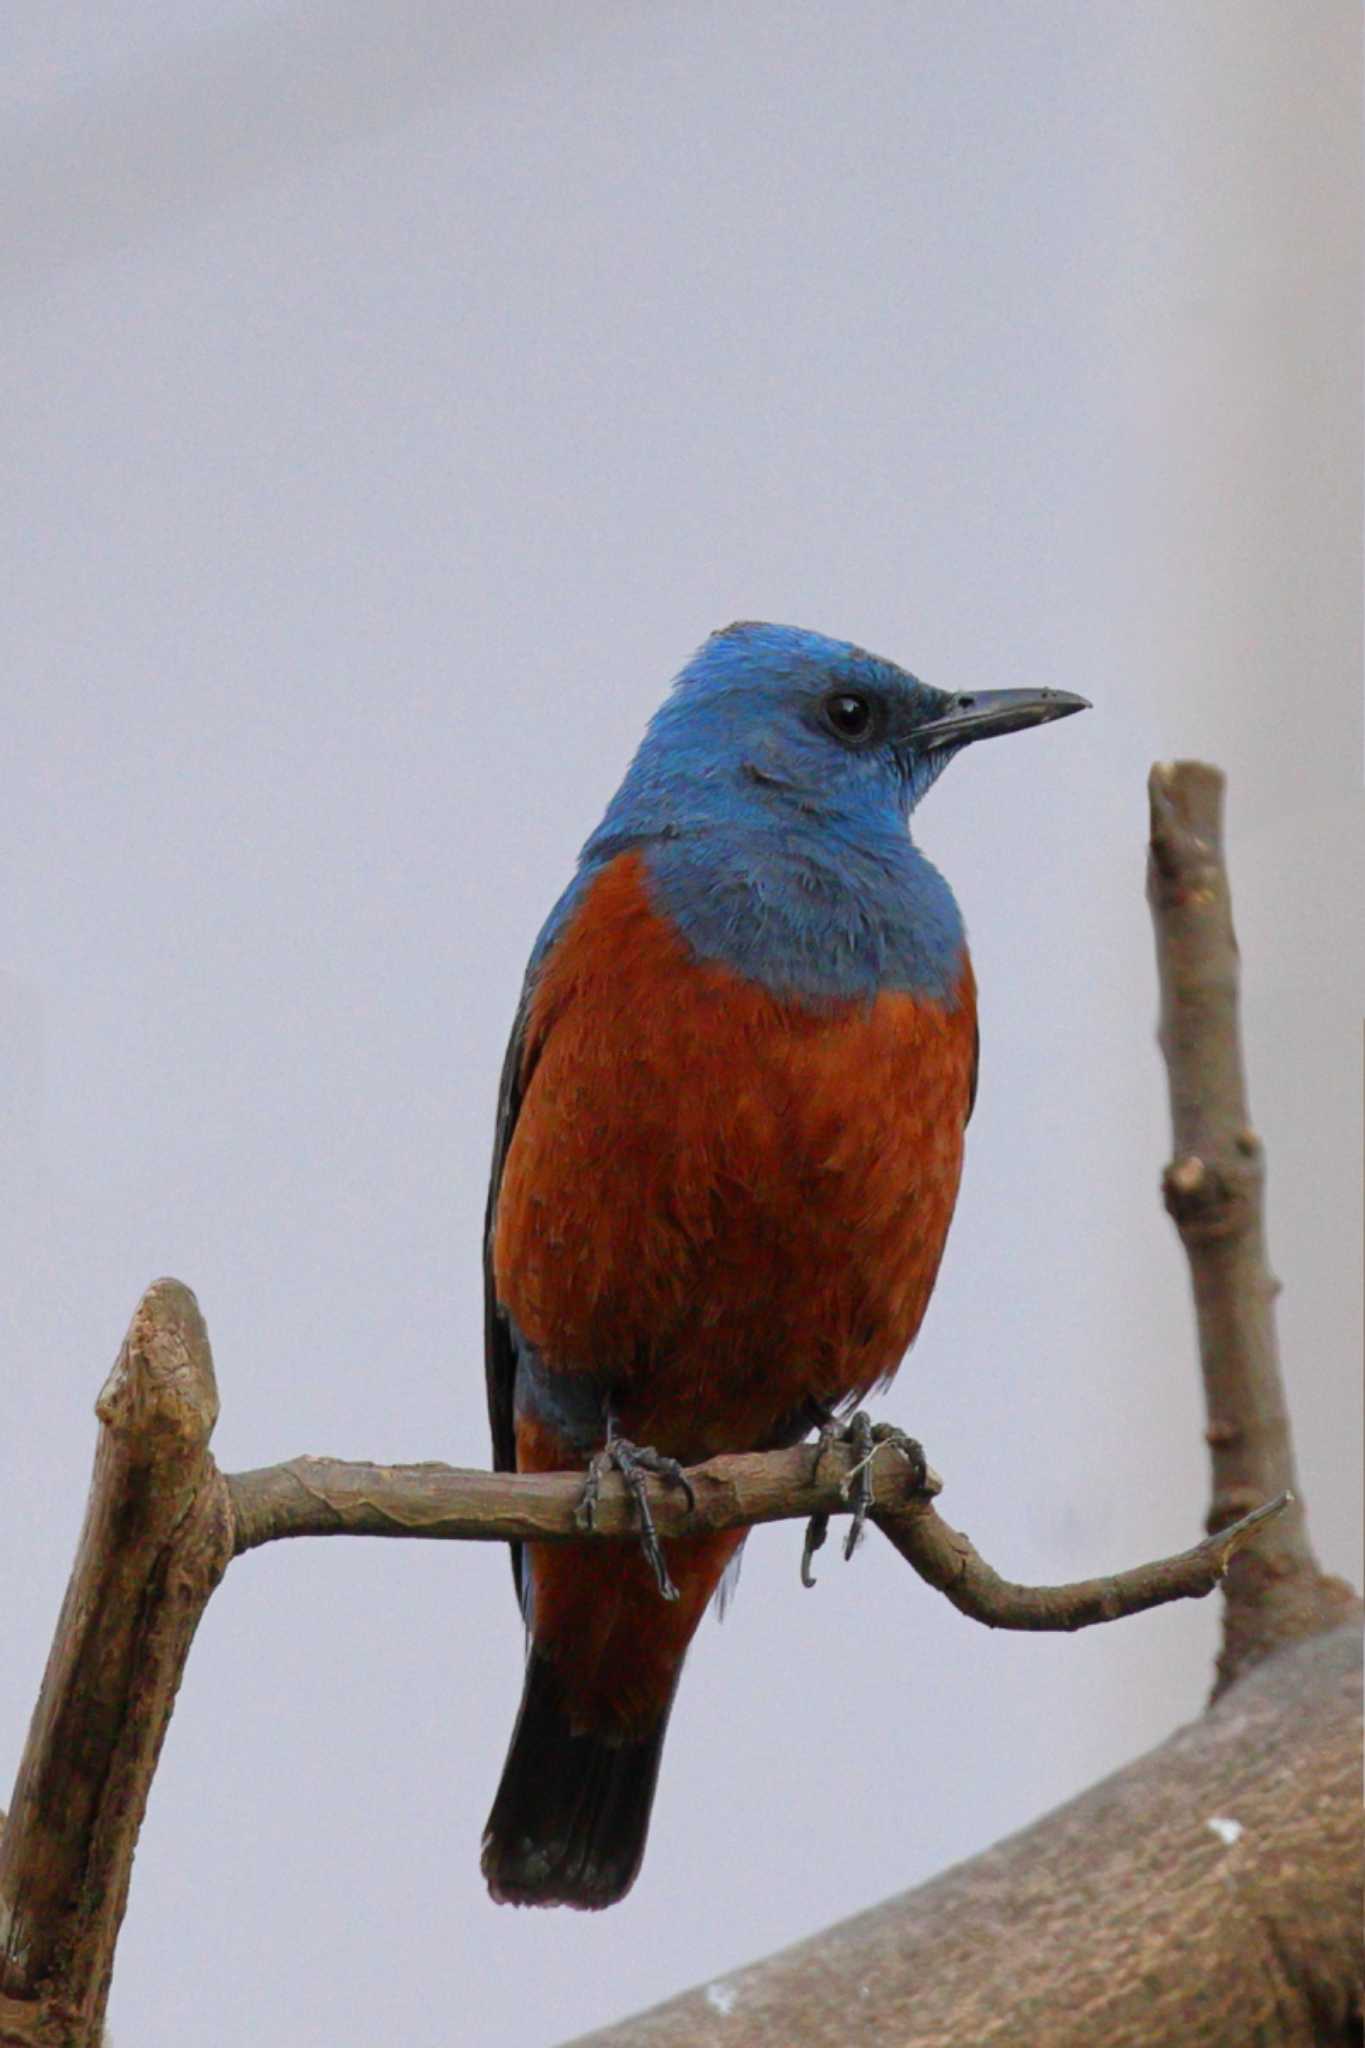 Photo of Blue Rock Thrush at 八王子市 by Picard T